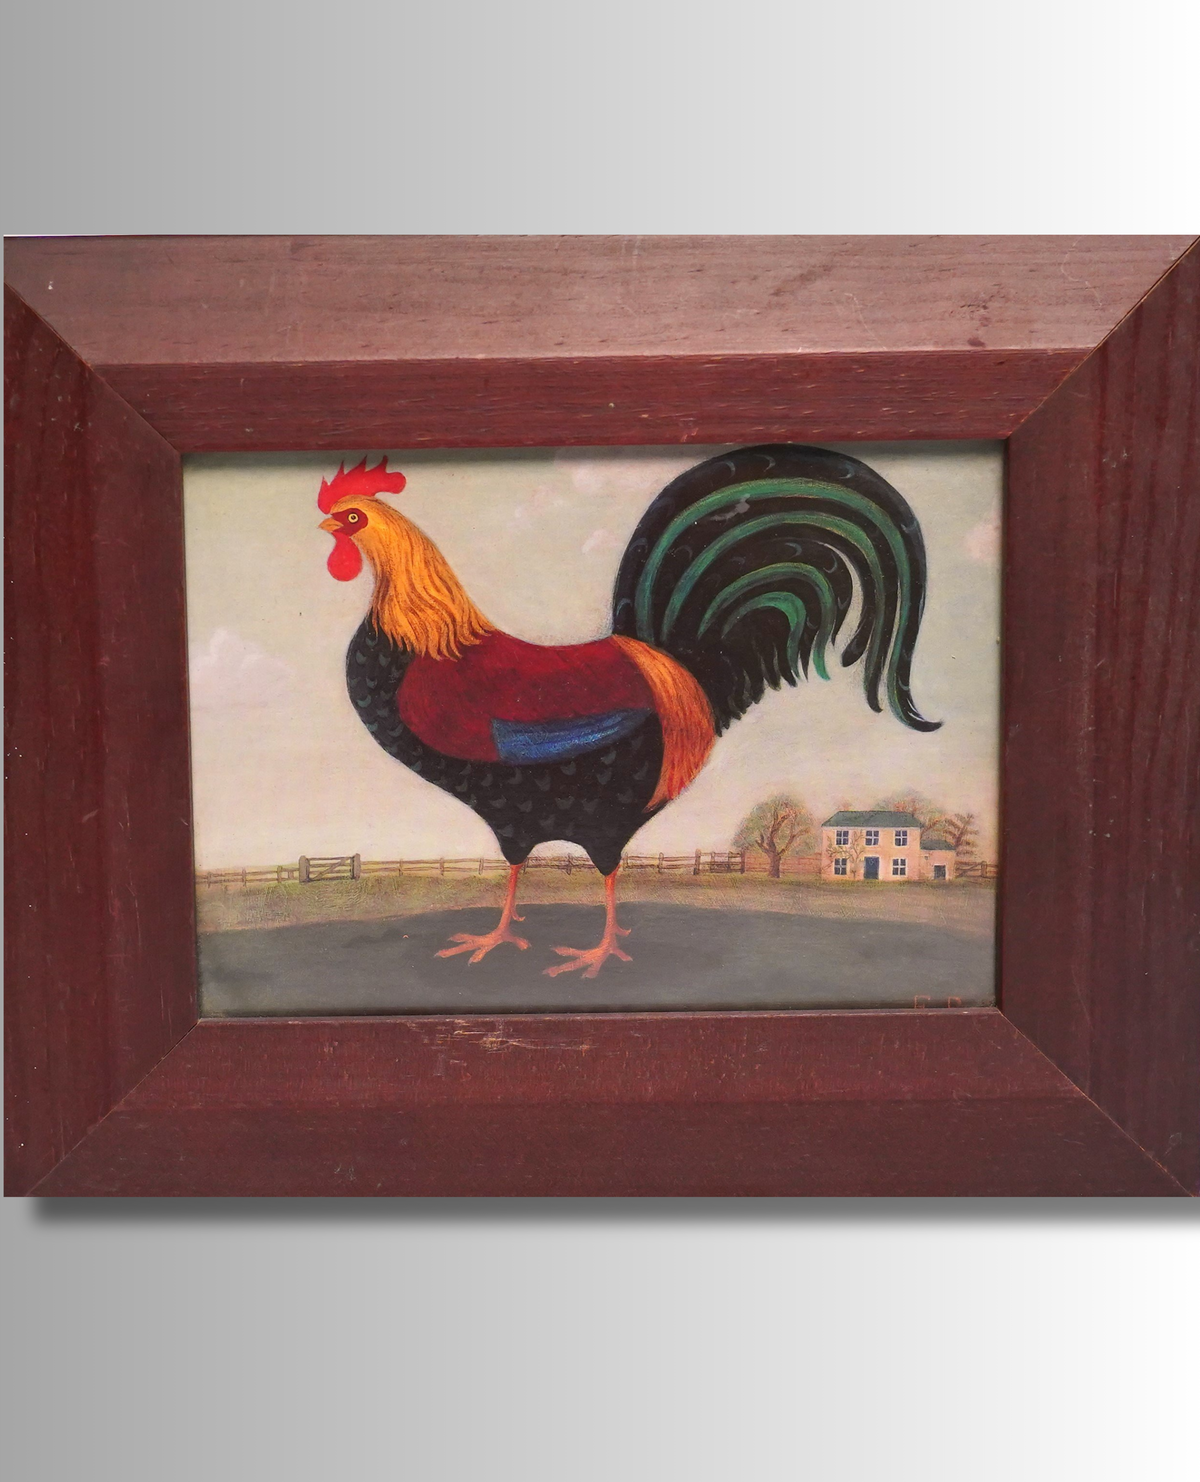 The Rooster - Red/Green Rooster Art Poster Print by Diane Pedersen - shopeeeys